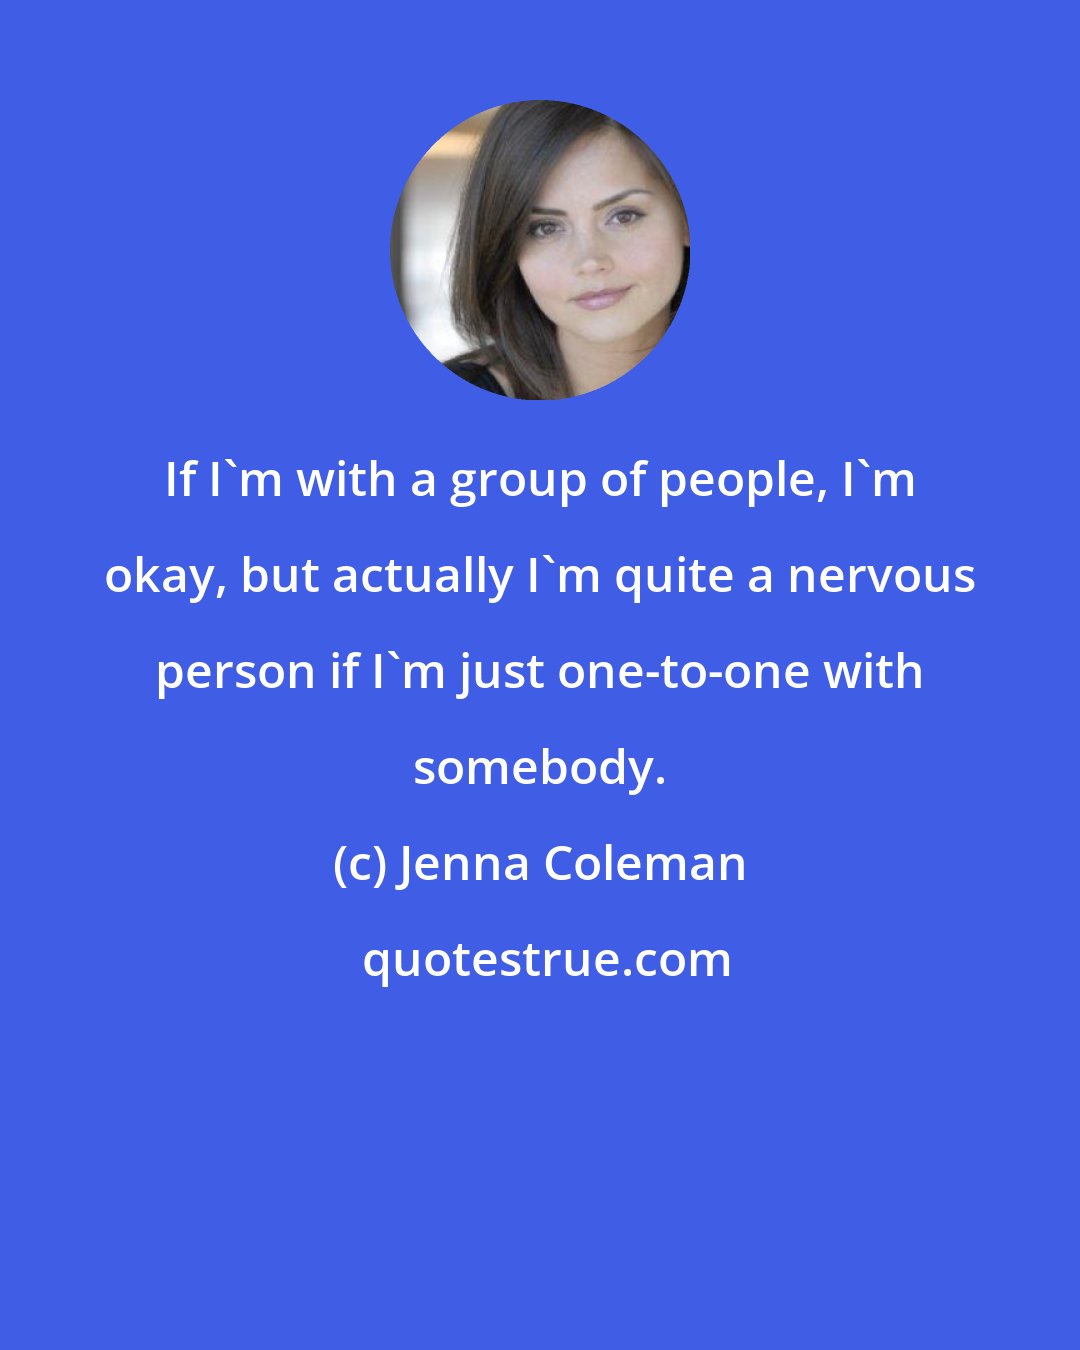 Jenna Coleman: If I'm with a group of people, I'm okay, but actually I'm quite a nervous person if I'm just one-to-one with somebody.